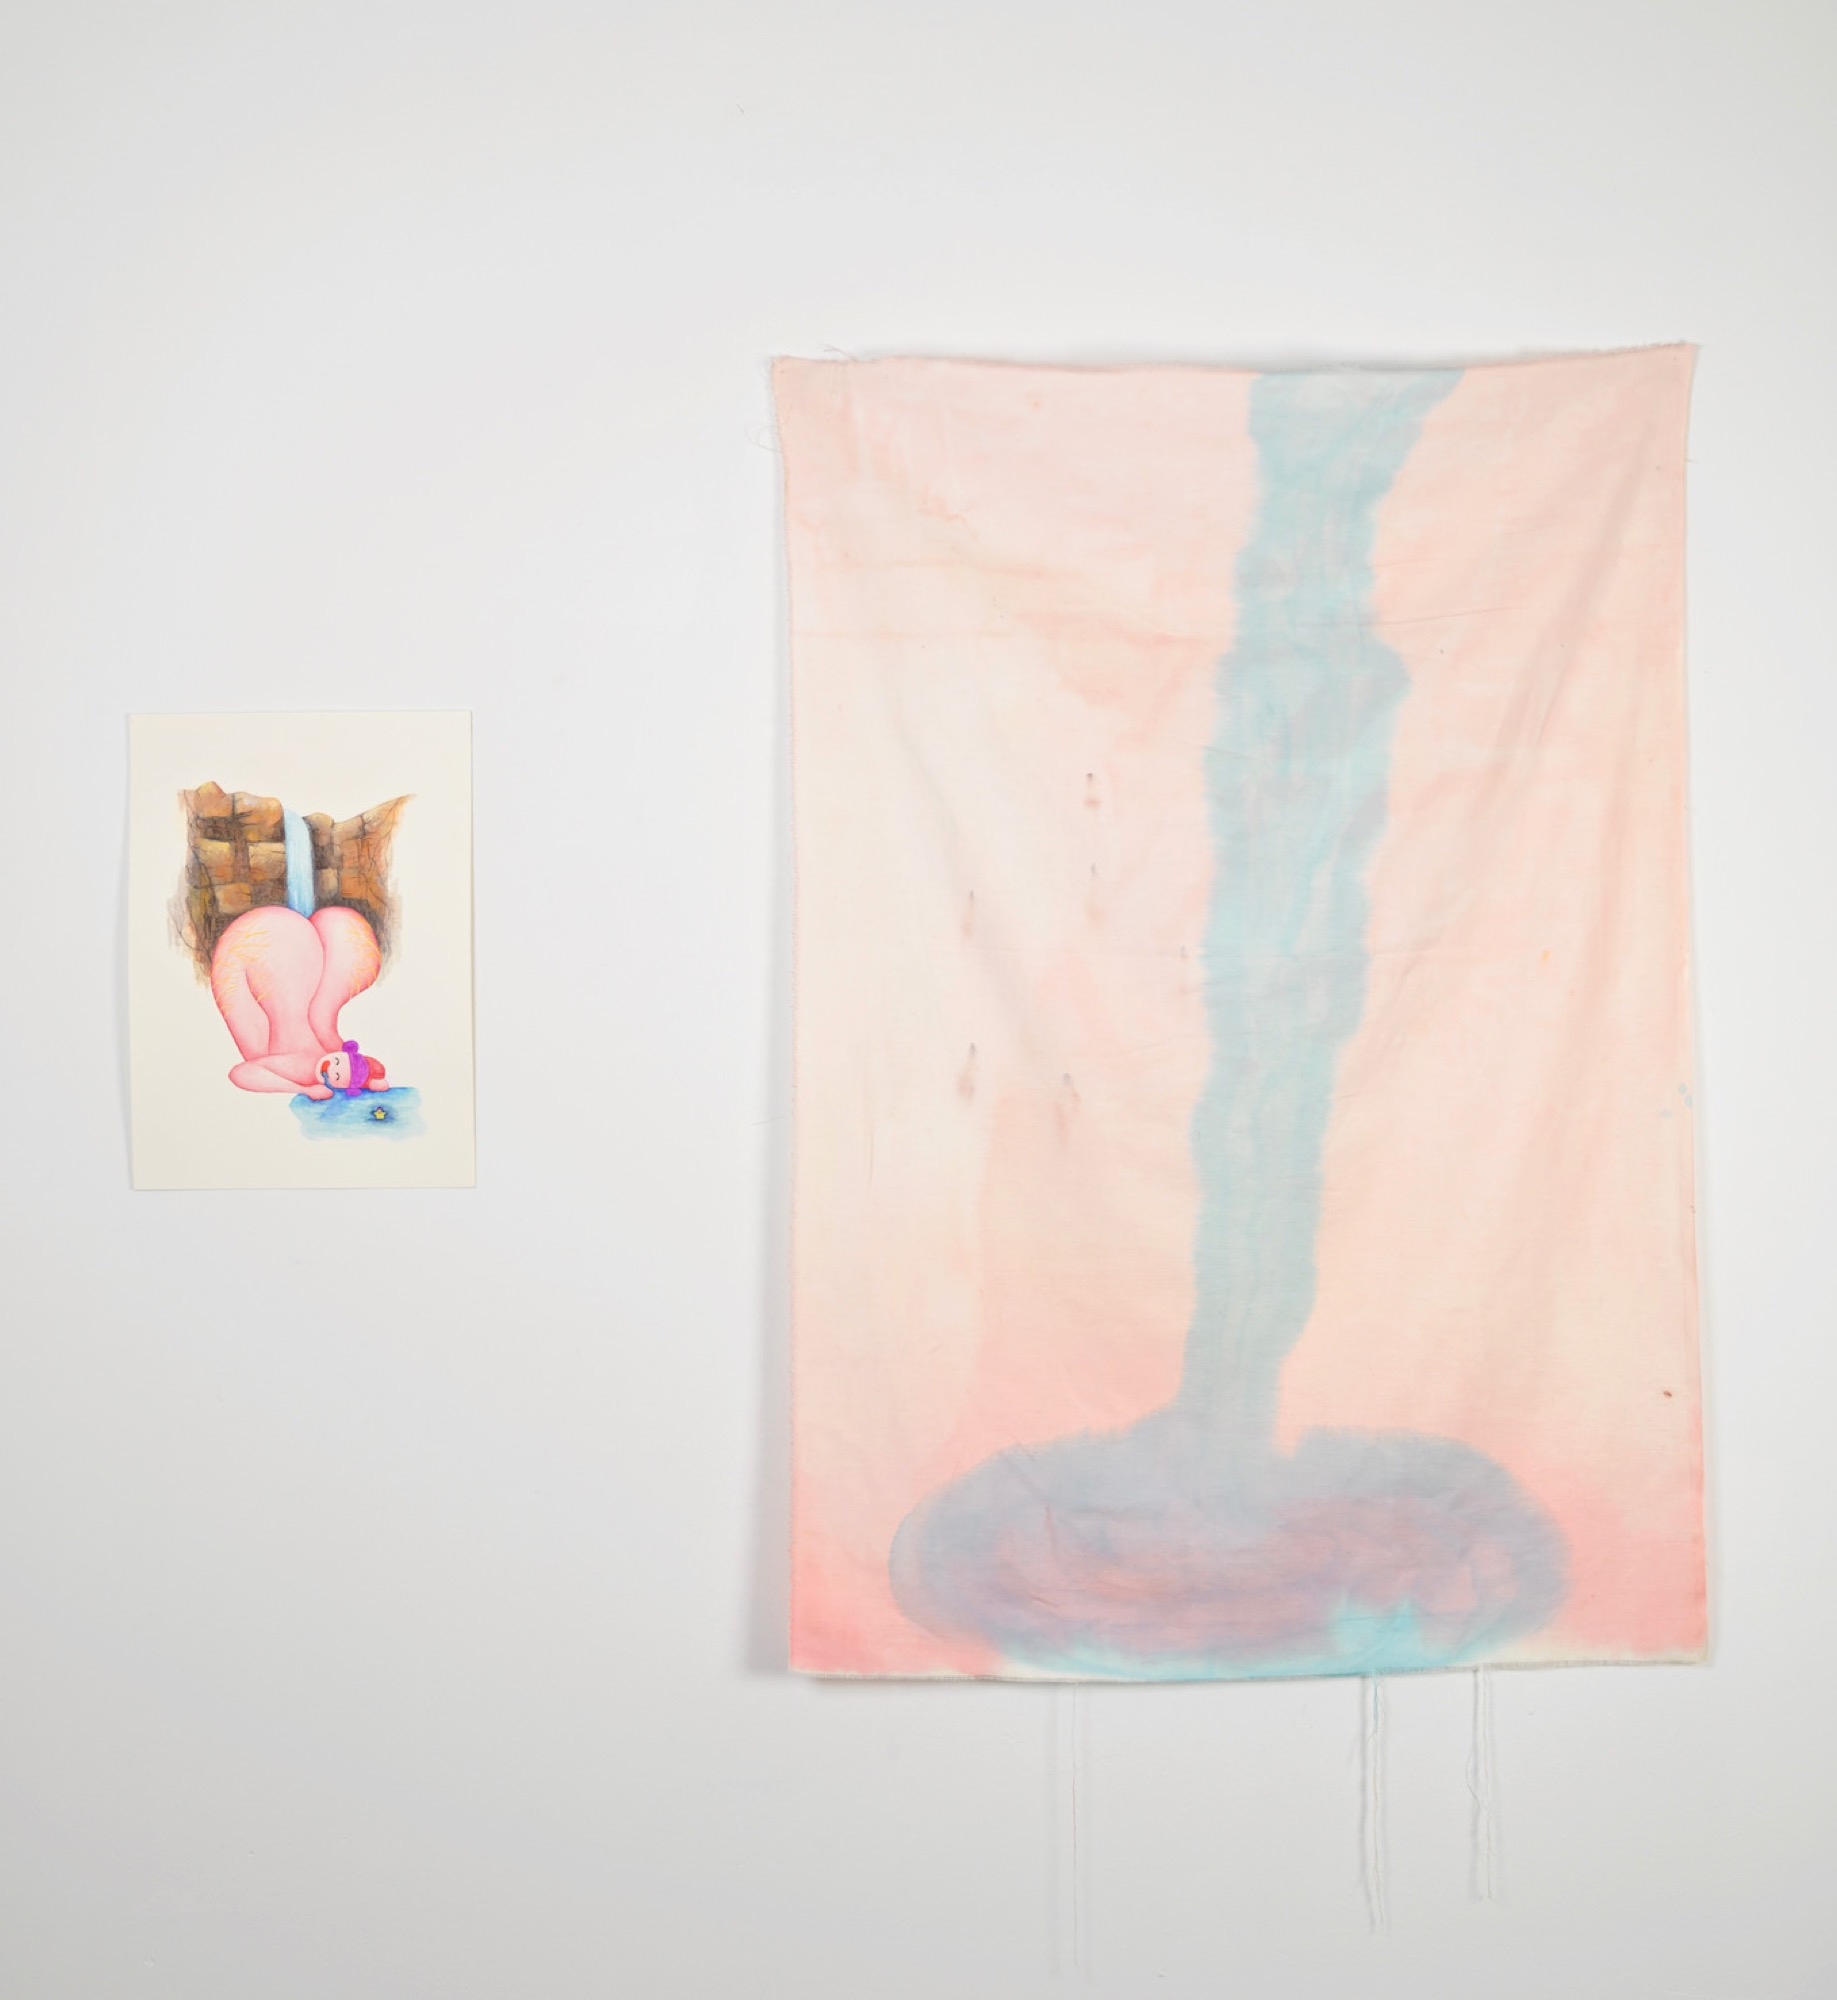 (L-R) 11. Noriko Nakamura, Don’t go chasing waterfalls, 2020, watercolour on paper, 25 X 18cm; Inbal Nissim, LABrINTO, 2020, ink on cotton, 67 x 48cm. Courtesy the artists and Caves.